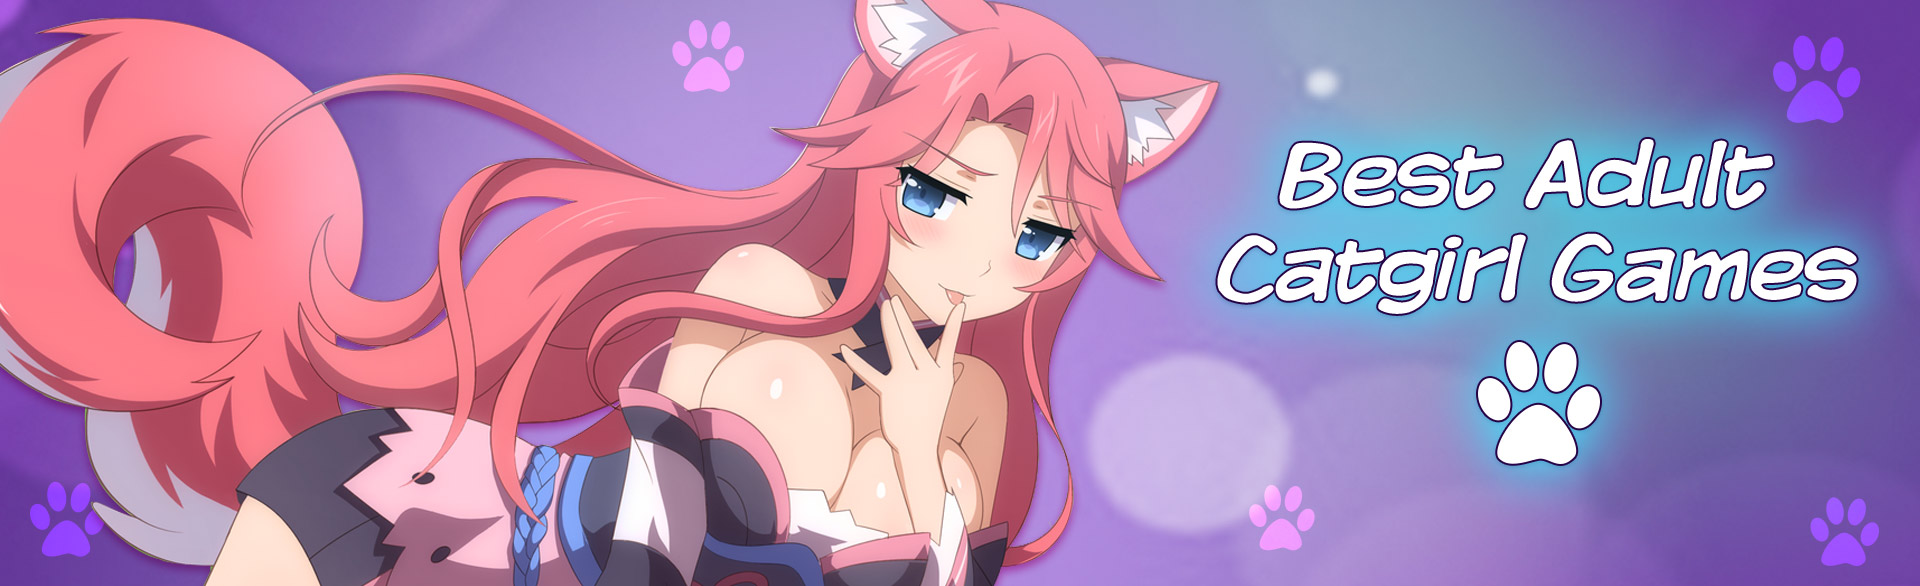 1920px x 586px - Best Adult Catgirl Games!